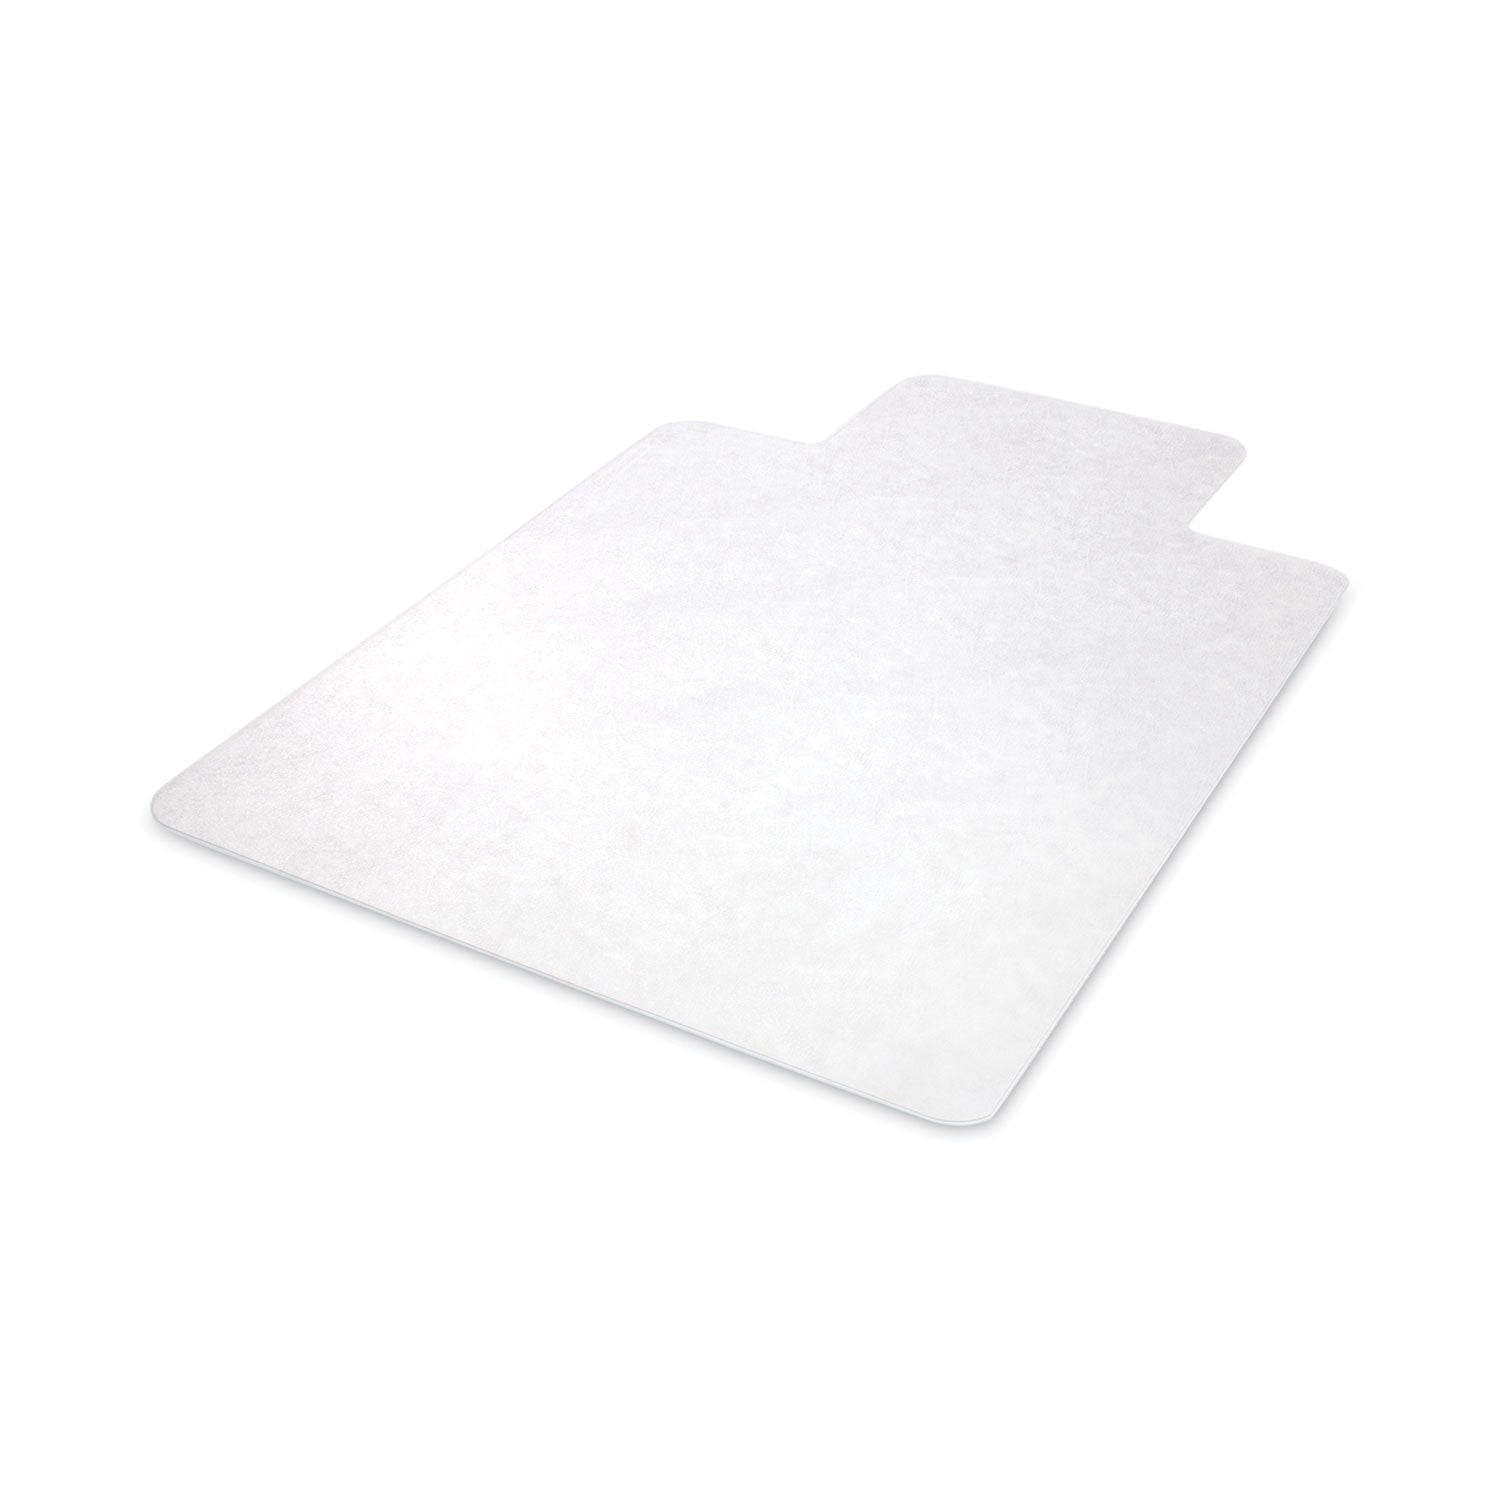 economat-all-day-use-chair-mat-for-hard-floors-flat-packed-46-x-60-lipped-clear_defcm2e432f - 6